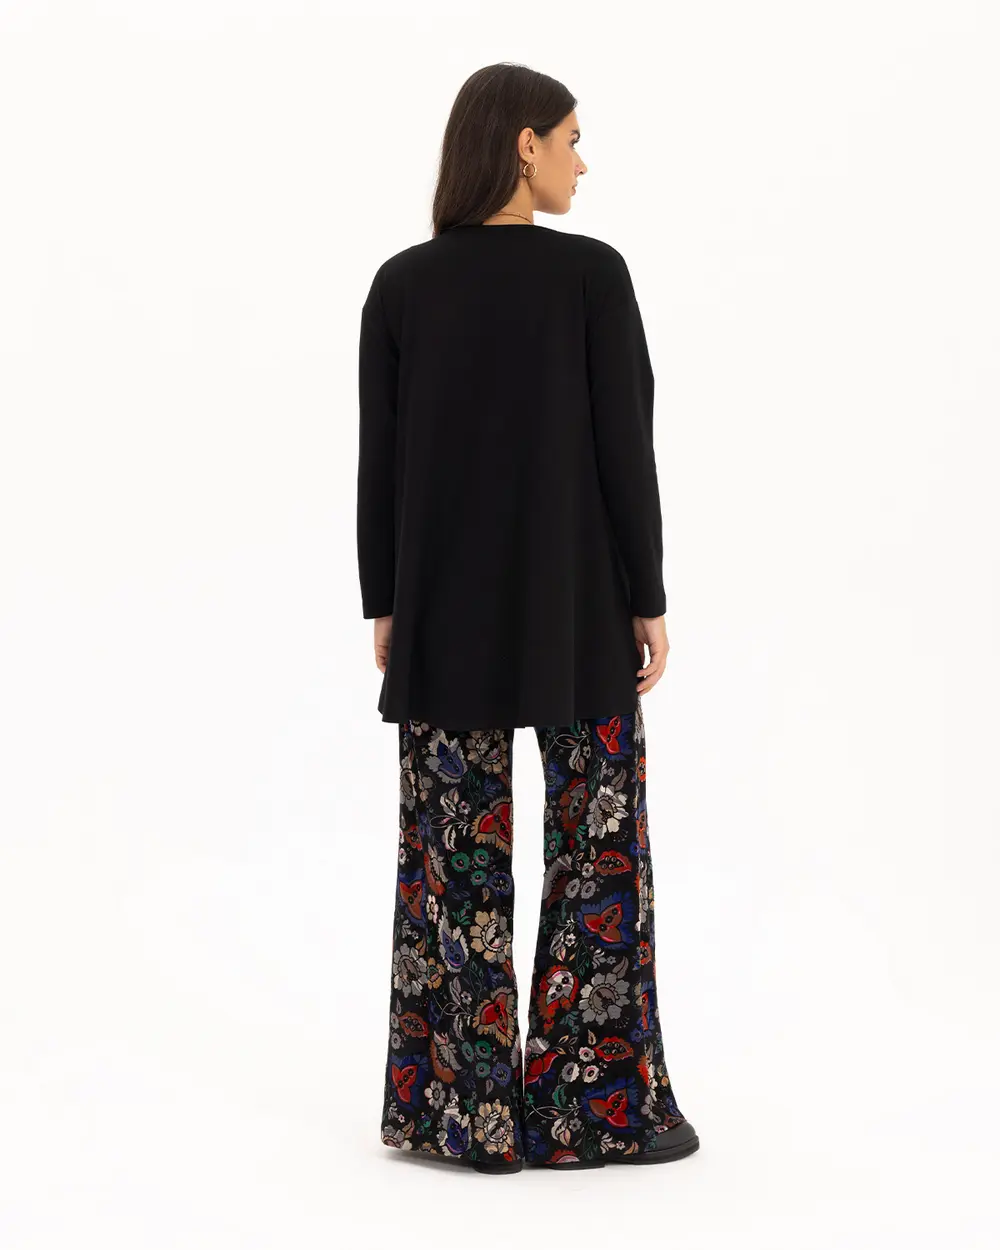 Floral Patterned Wide Leg Trousers